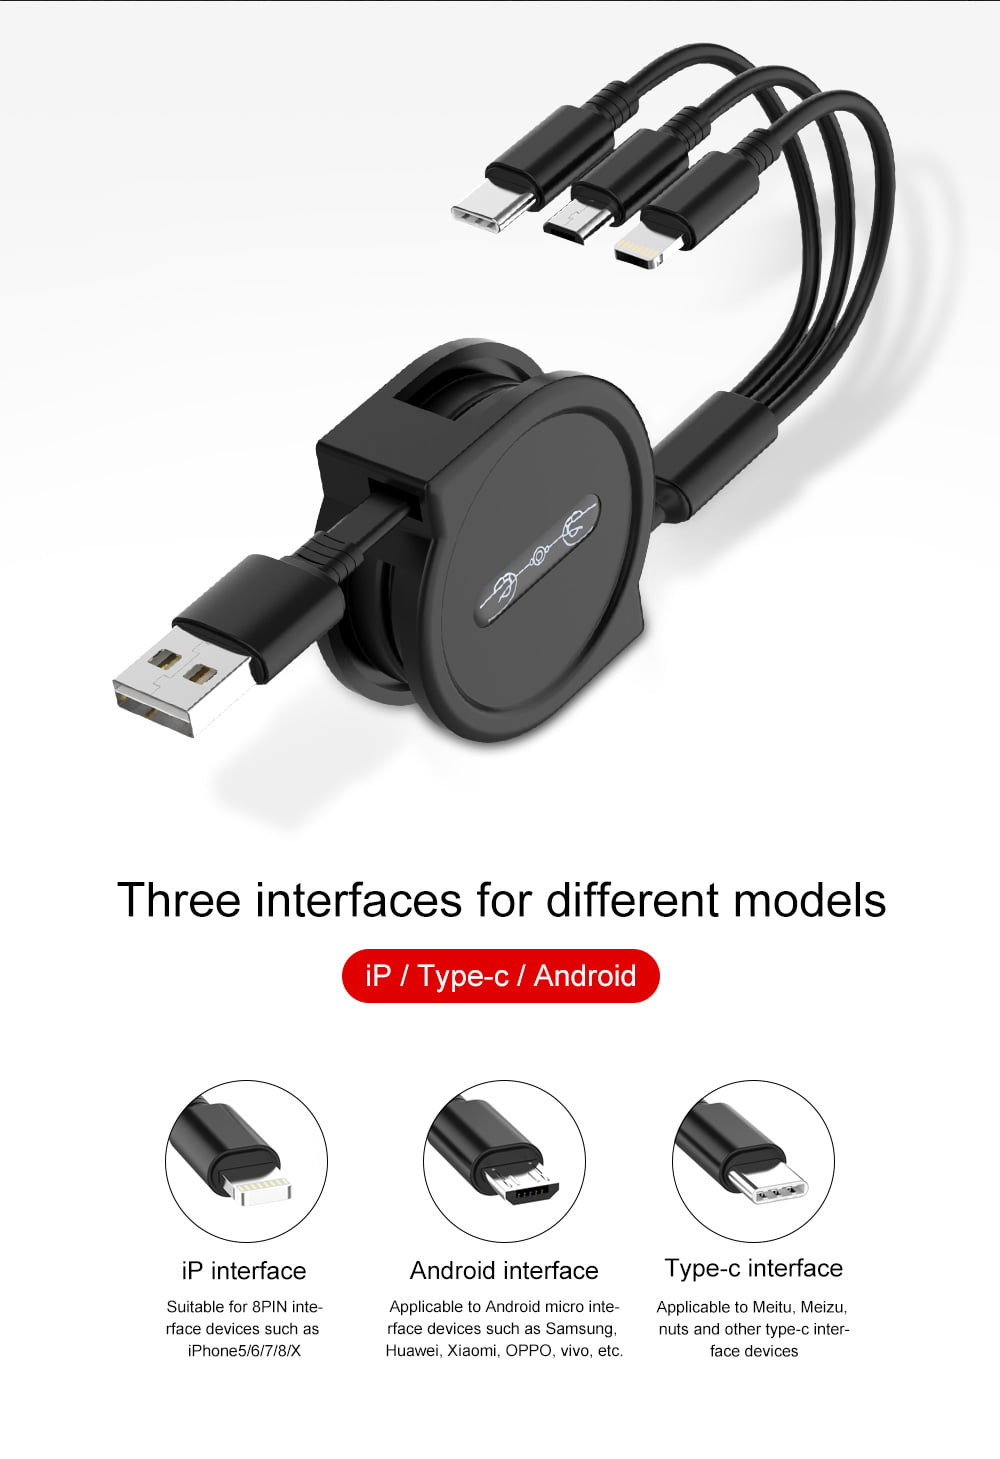 Multi Charging Cable Portable 3 in 1 USB Cable USB Power Cords for Cell Phone Tablets and More Devices Charging